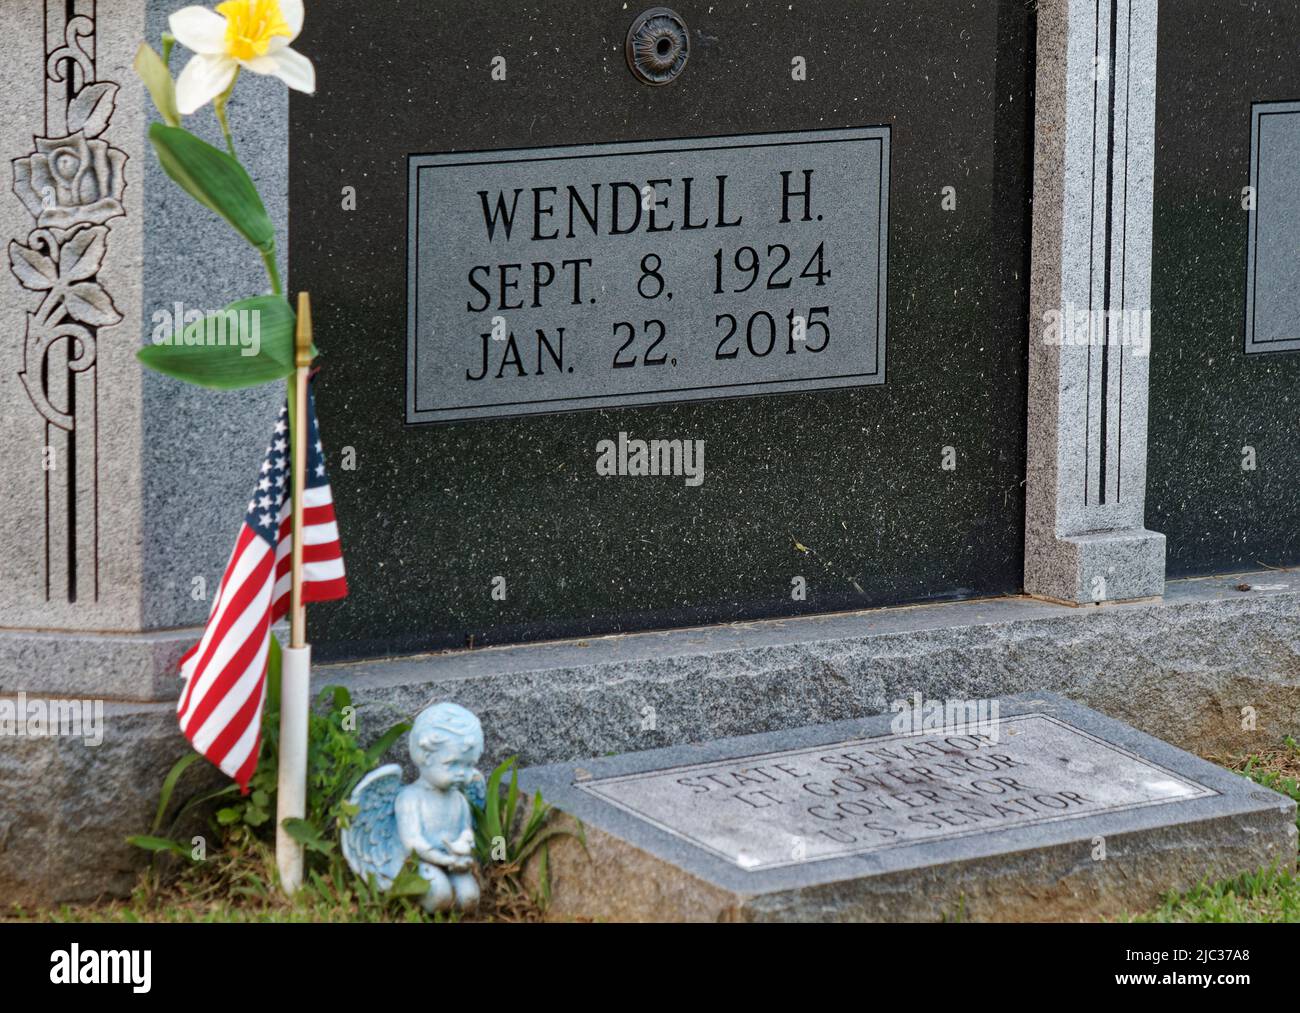 An American flag and small cherub statue adorn the gravesite of former United States Sen. Wendell Hampton Ford (1924-2015) on Memorial Day, Monday, May 30, 2022 at Rosehill-Elmwood Cemetery & Mausoleum in Owensboro, Daviess County, KY, USA. Ford was a veteran who served in the U.S. Army during World War II and then the Kentucky Army National Guard before beginning a storied political career in 1965. (Apex MediaWire Photo by Billy Suratt) Stock Photo